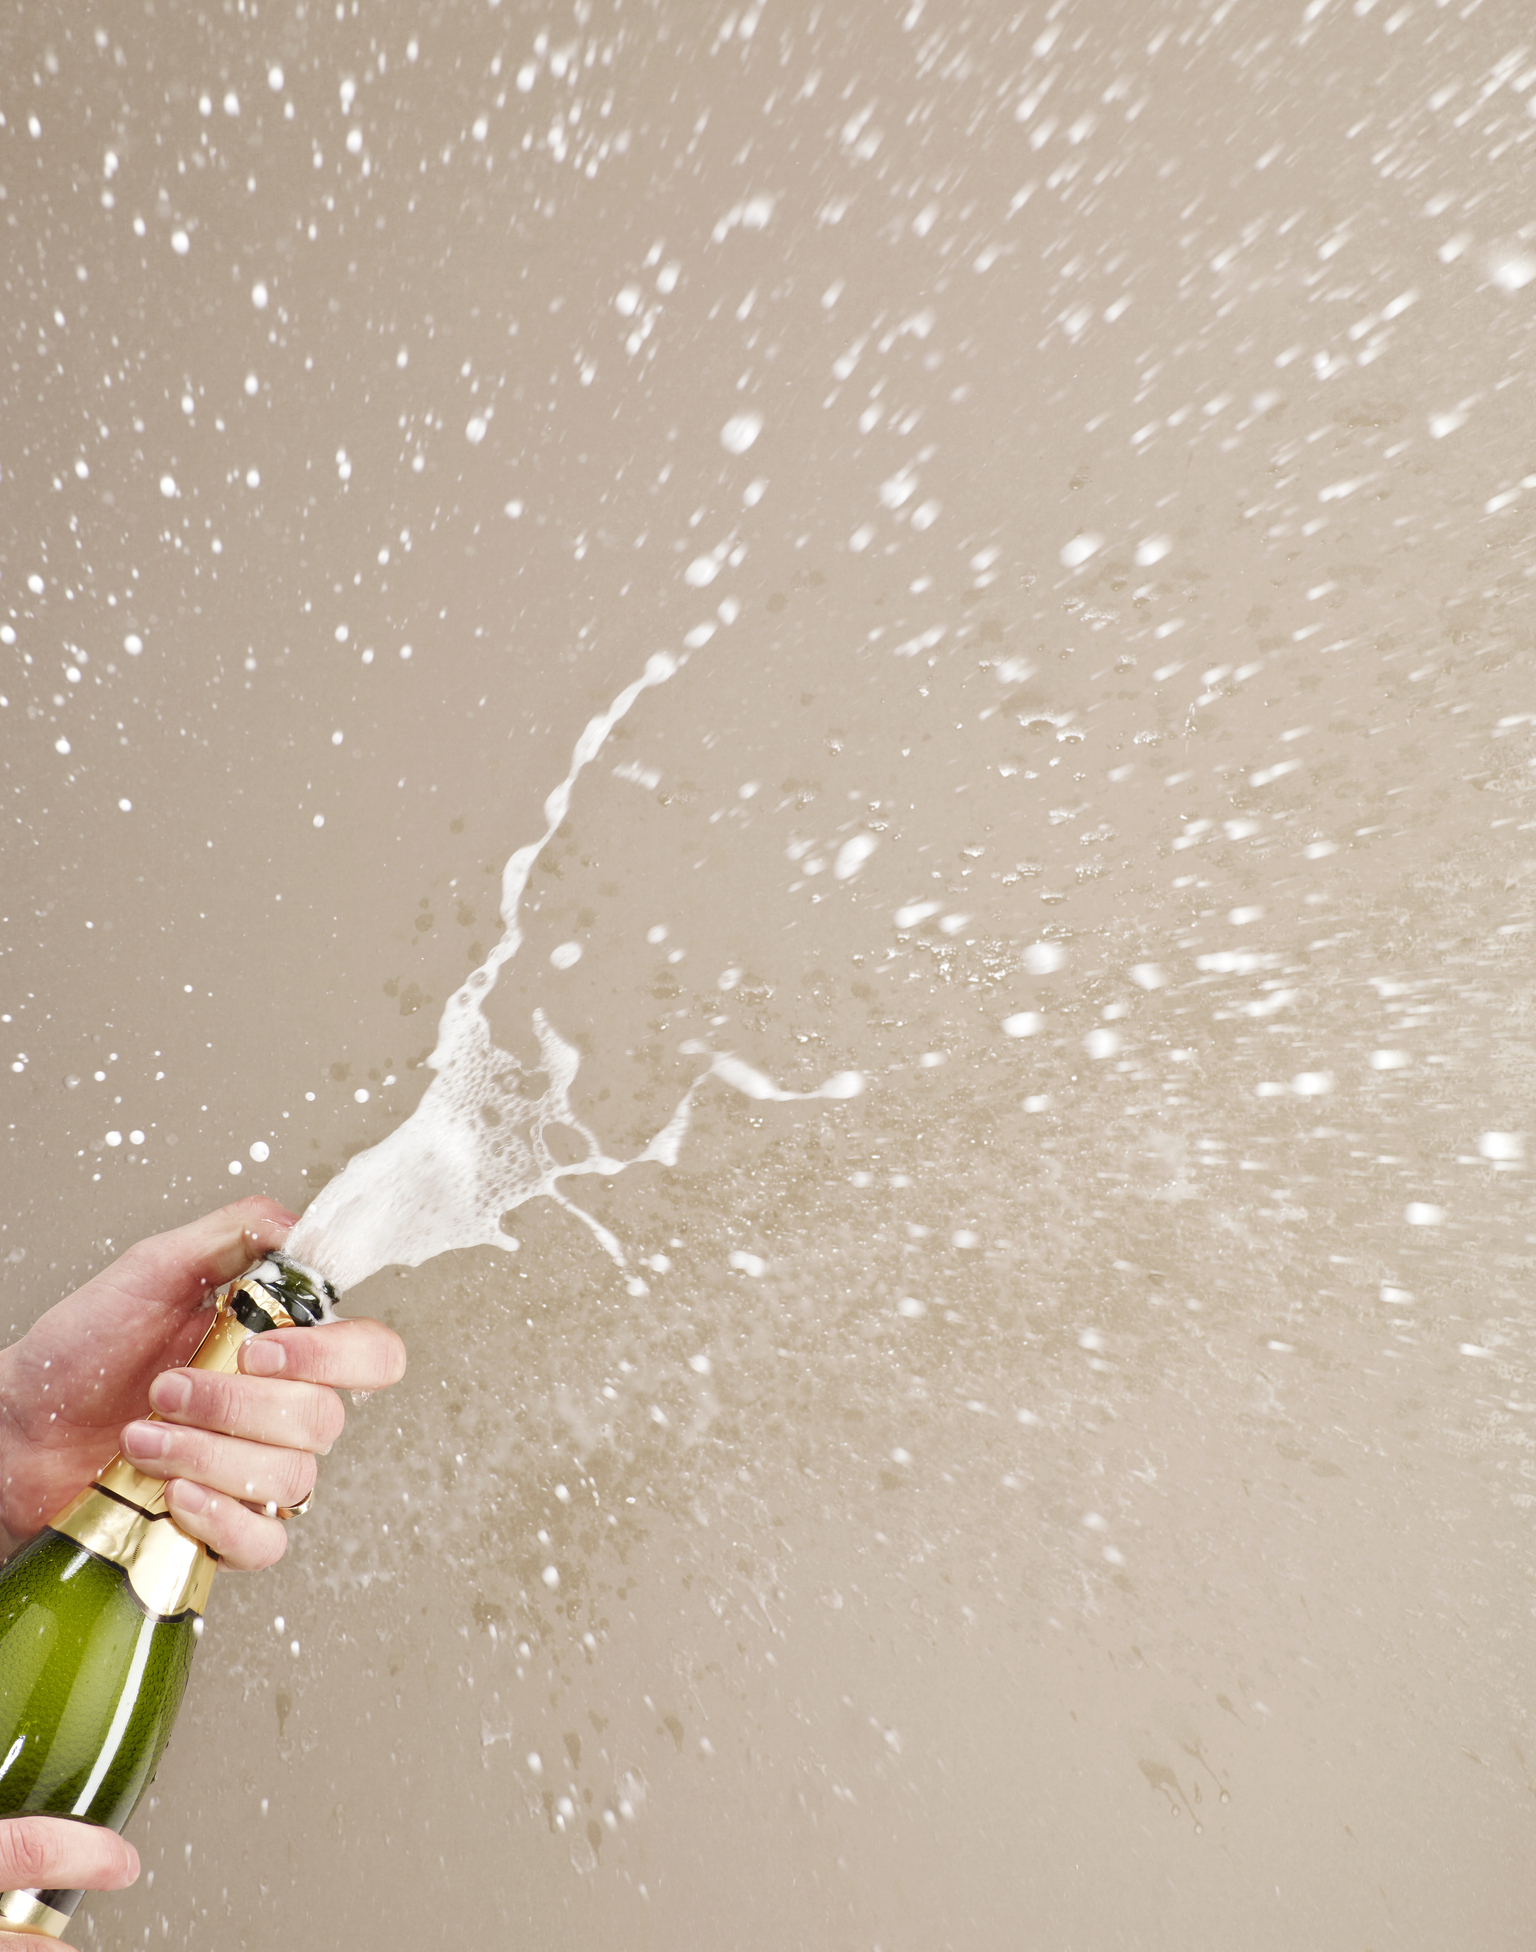 Hand holding a champagne bottle with cork popped and foam spraying out,